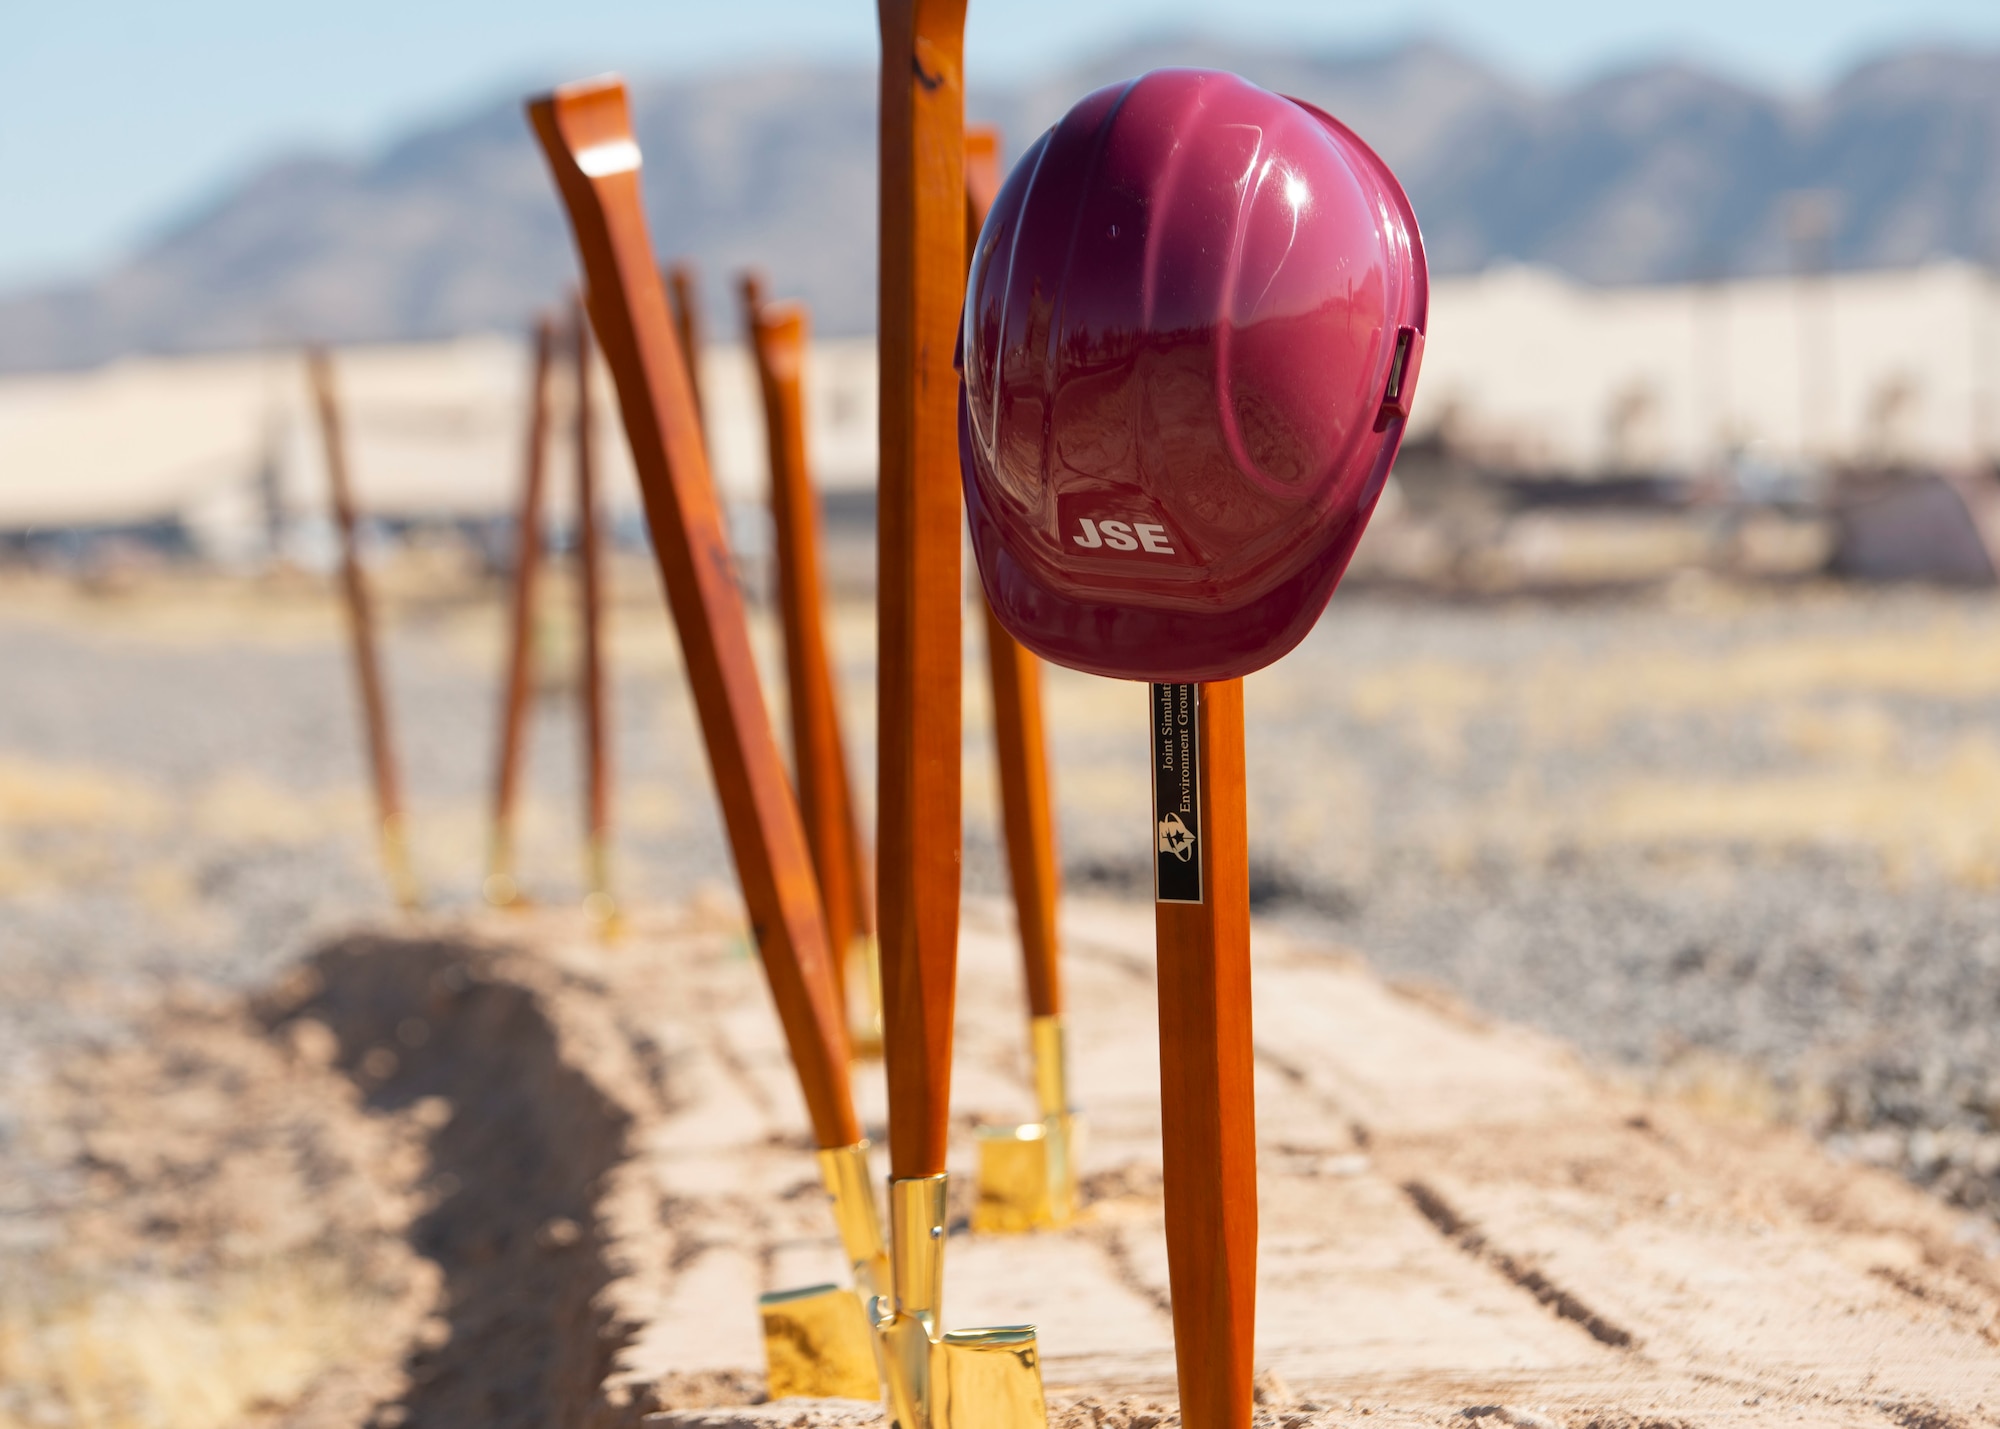 Photos of helmets and shovels for the JSE Groundbreaking Ceremony